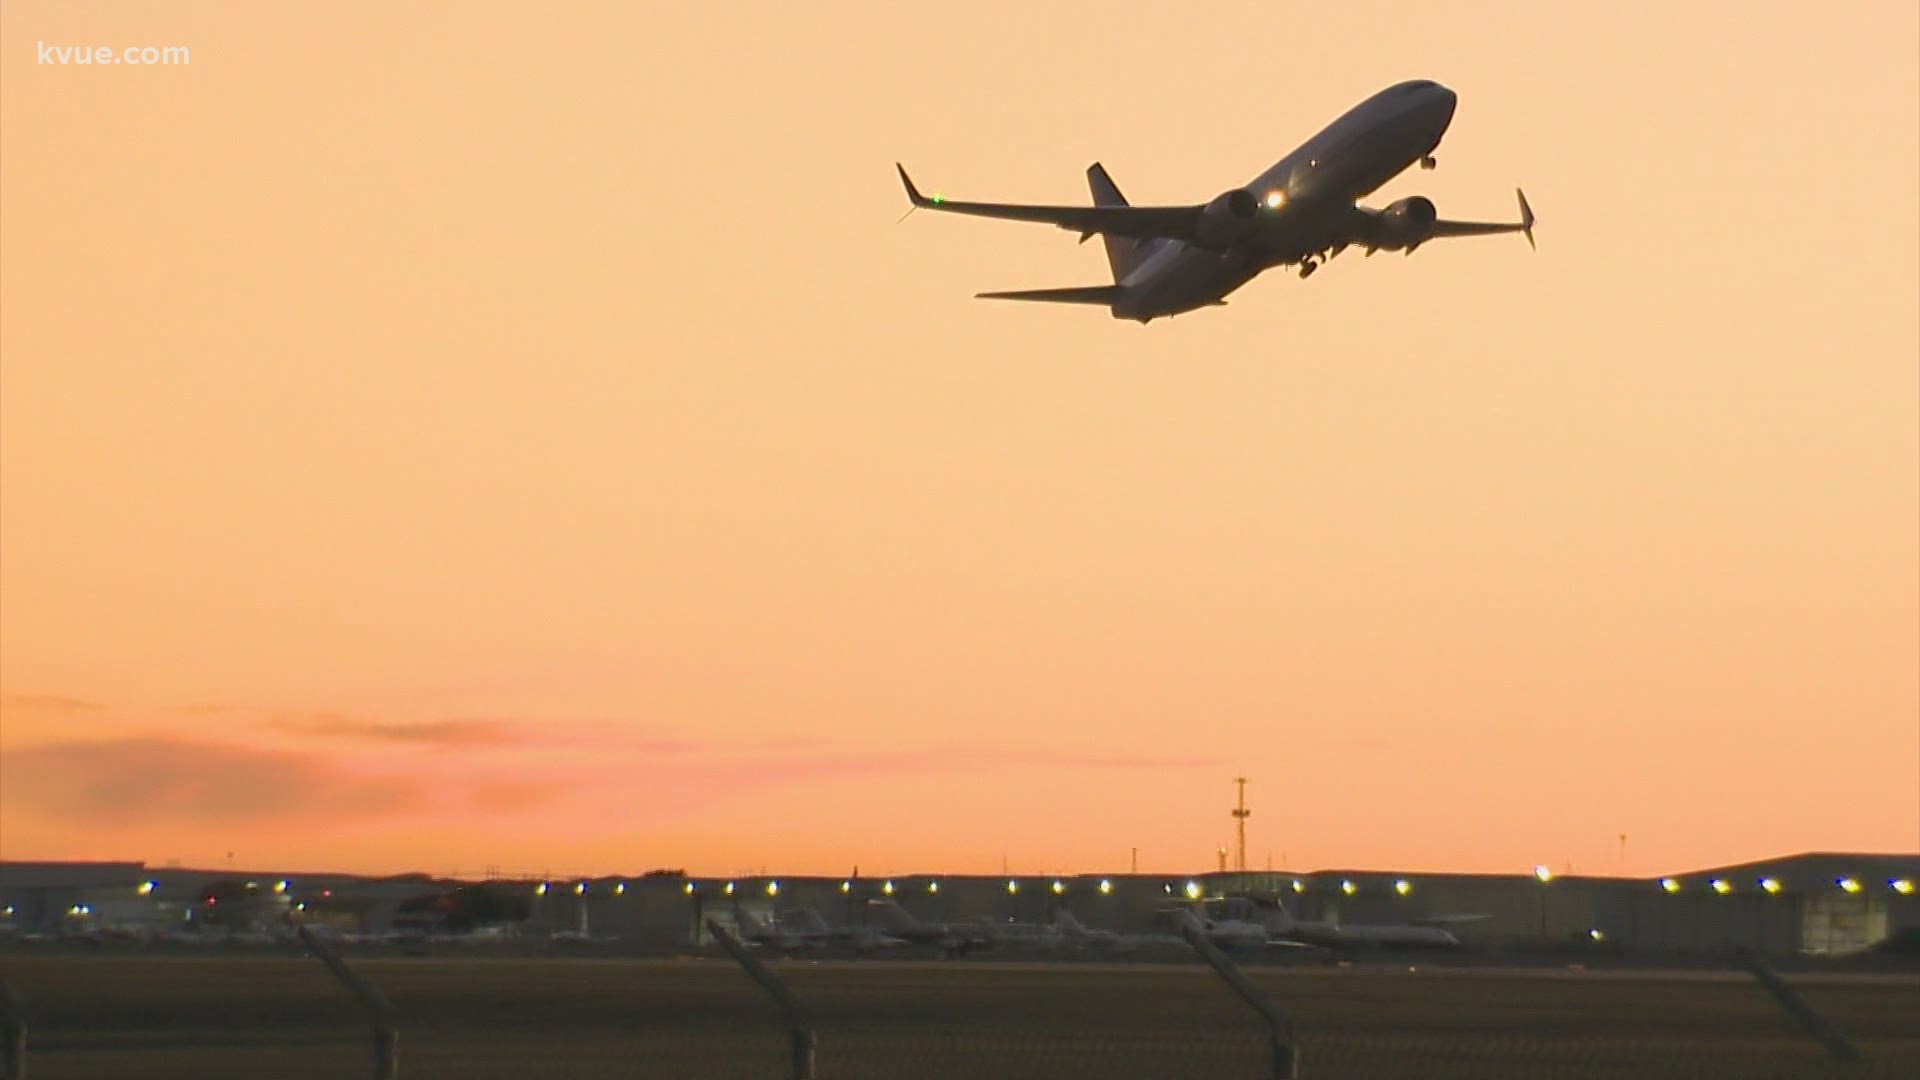 Things are starting to feel more like normal at the Austin airport. KVUE's Bryce Newberry has more on the strong signs of recovery AUS is seeing.